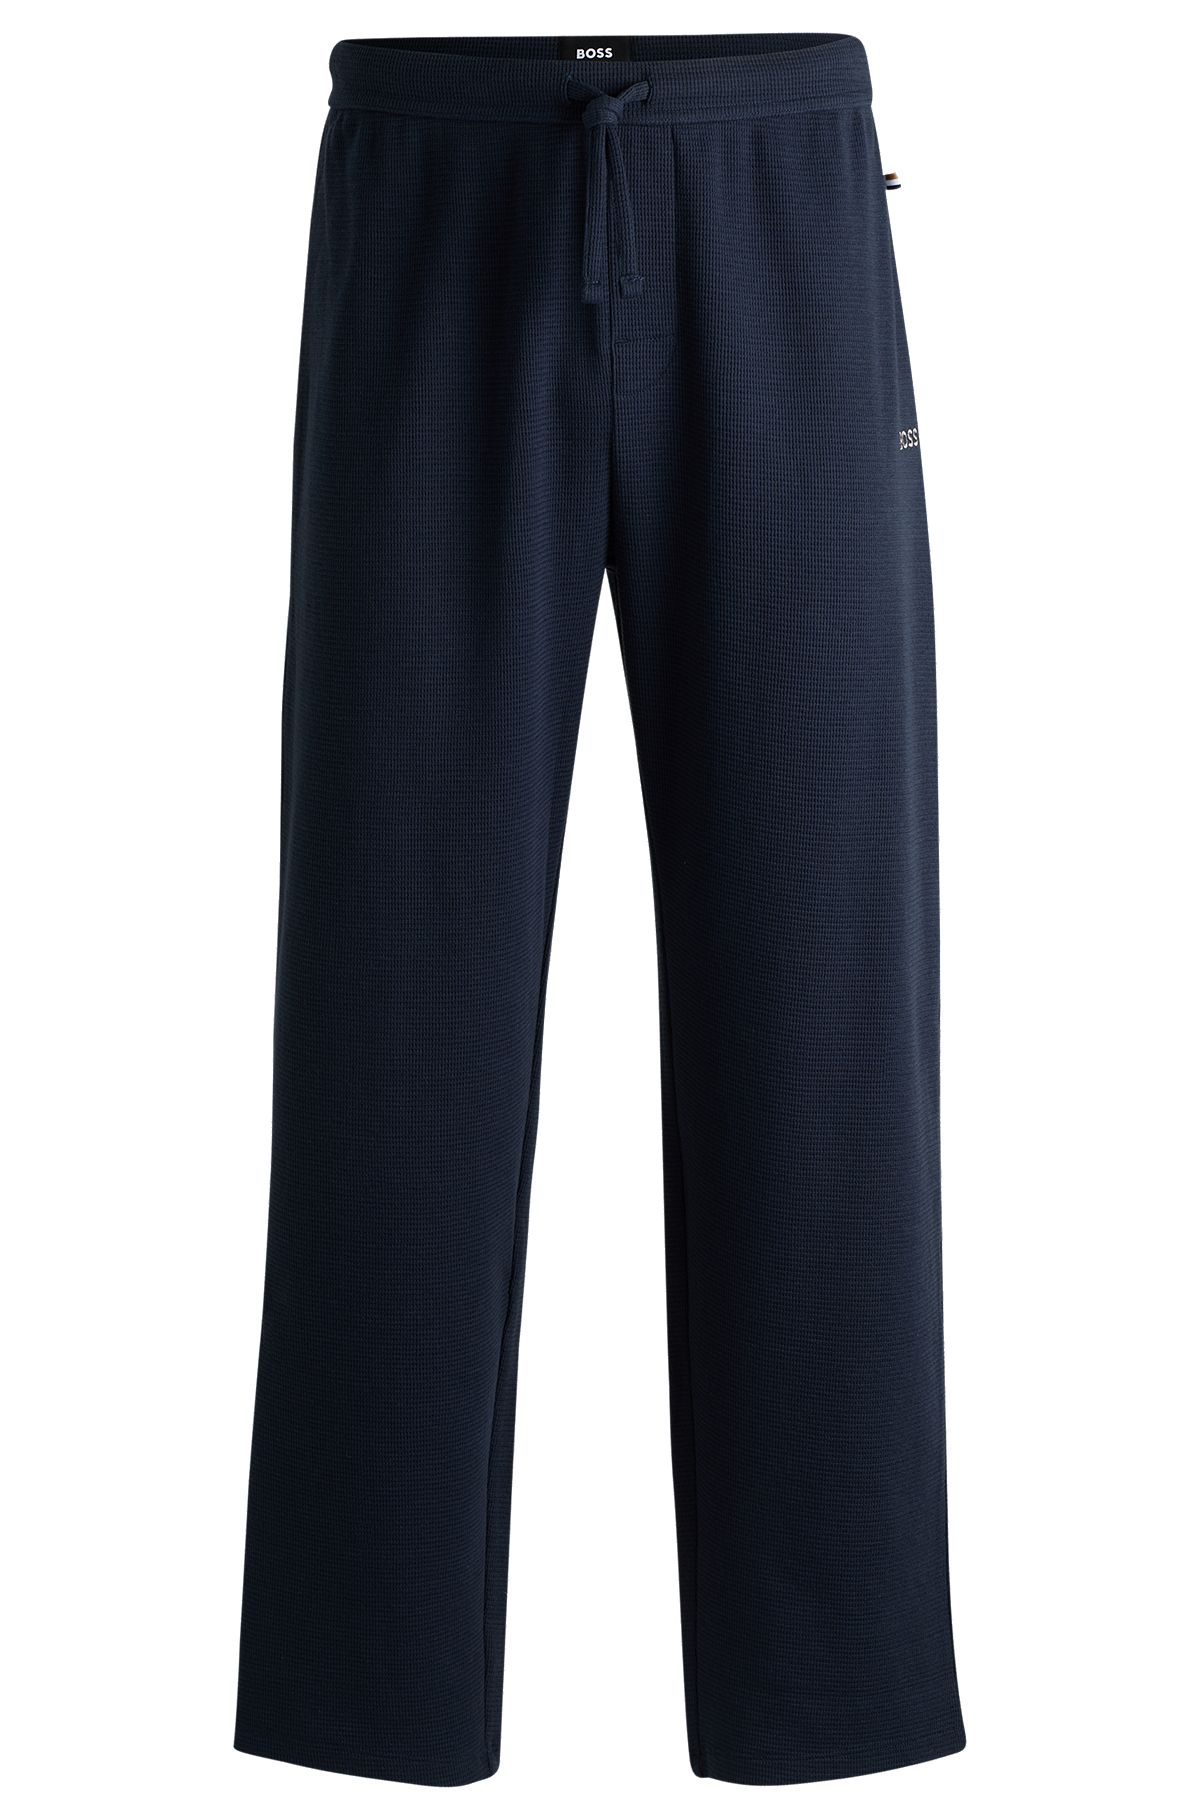 and men | HUGO quality high nightwear BOSS Comfortable for